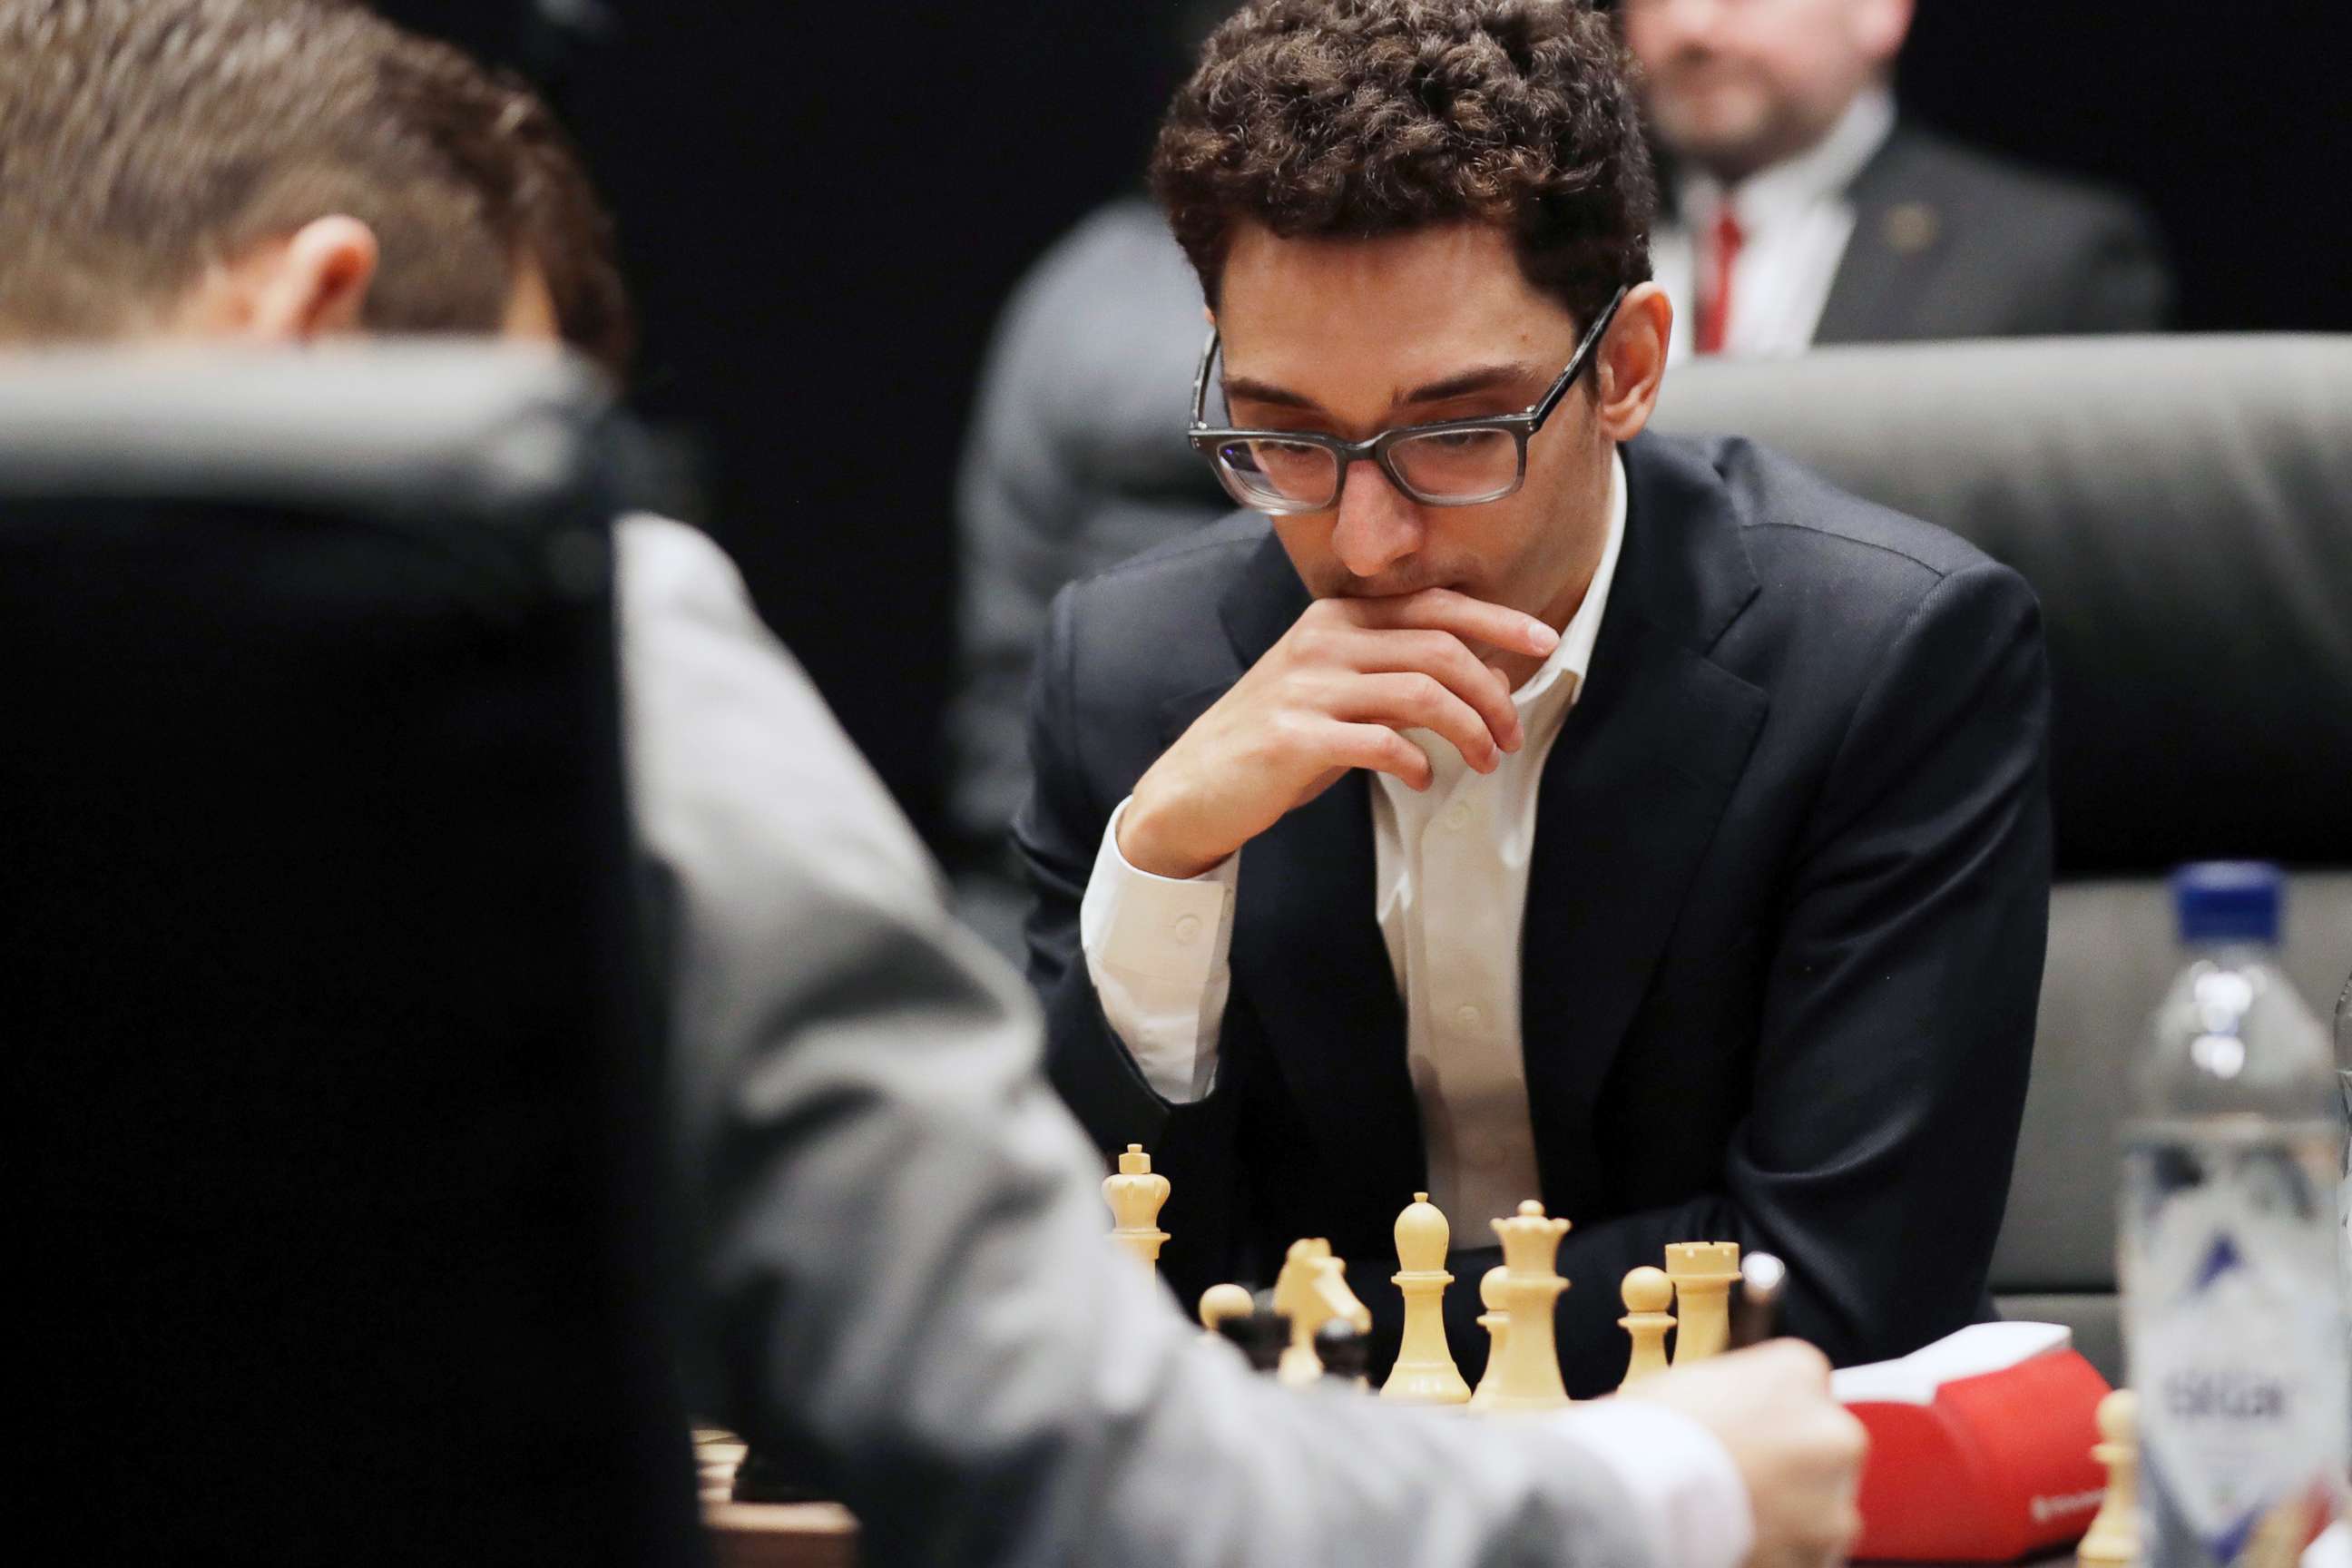 Fabiano Caruana, 26, could be the first US World Chess champ since